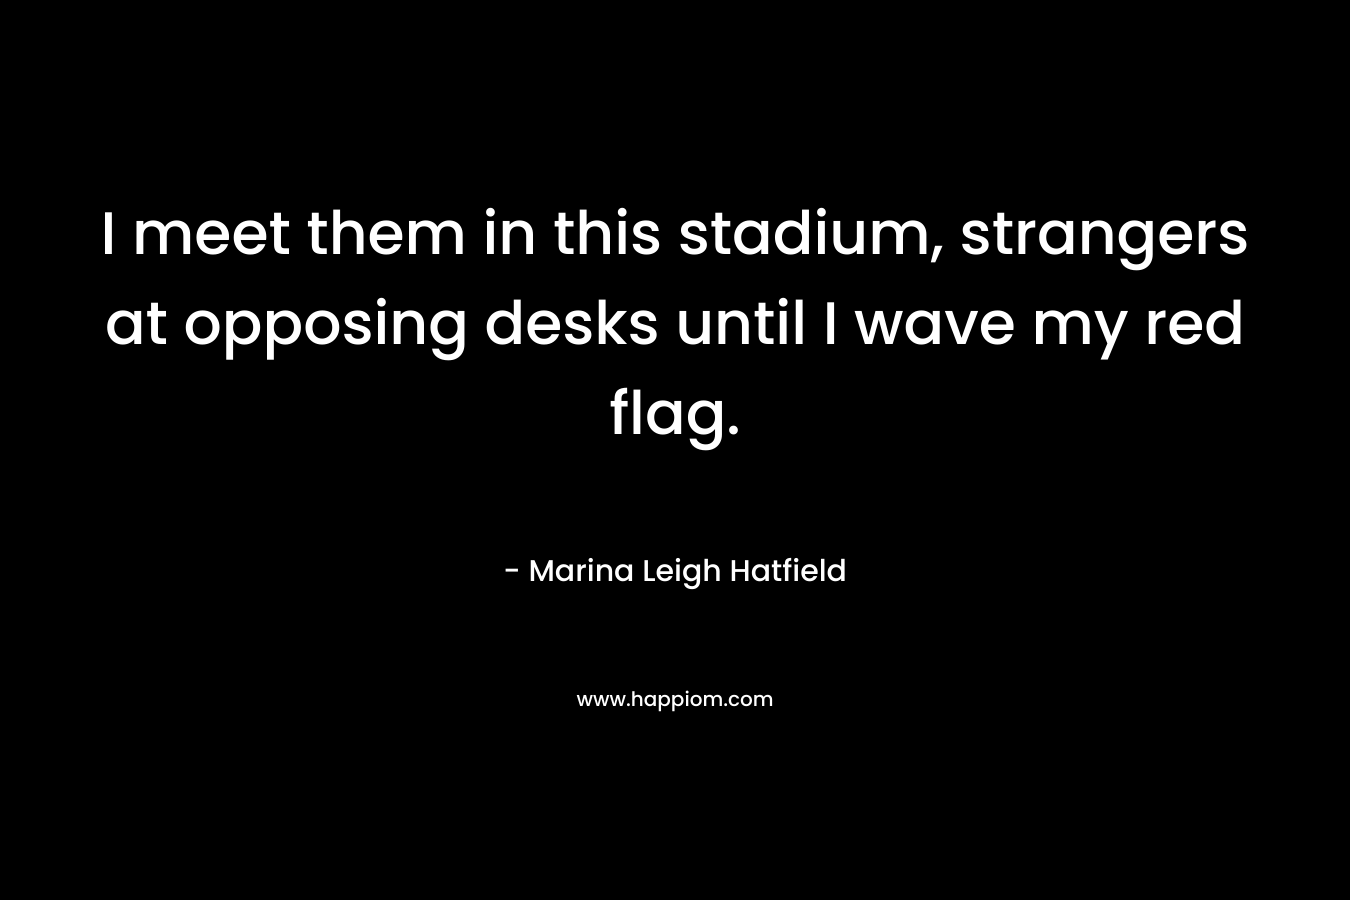 I meet them in this stadium, strangers at opposing desks until I wave my red flag. – Marina Leigh Hatfield